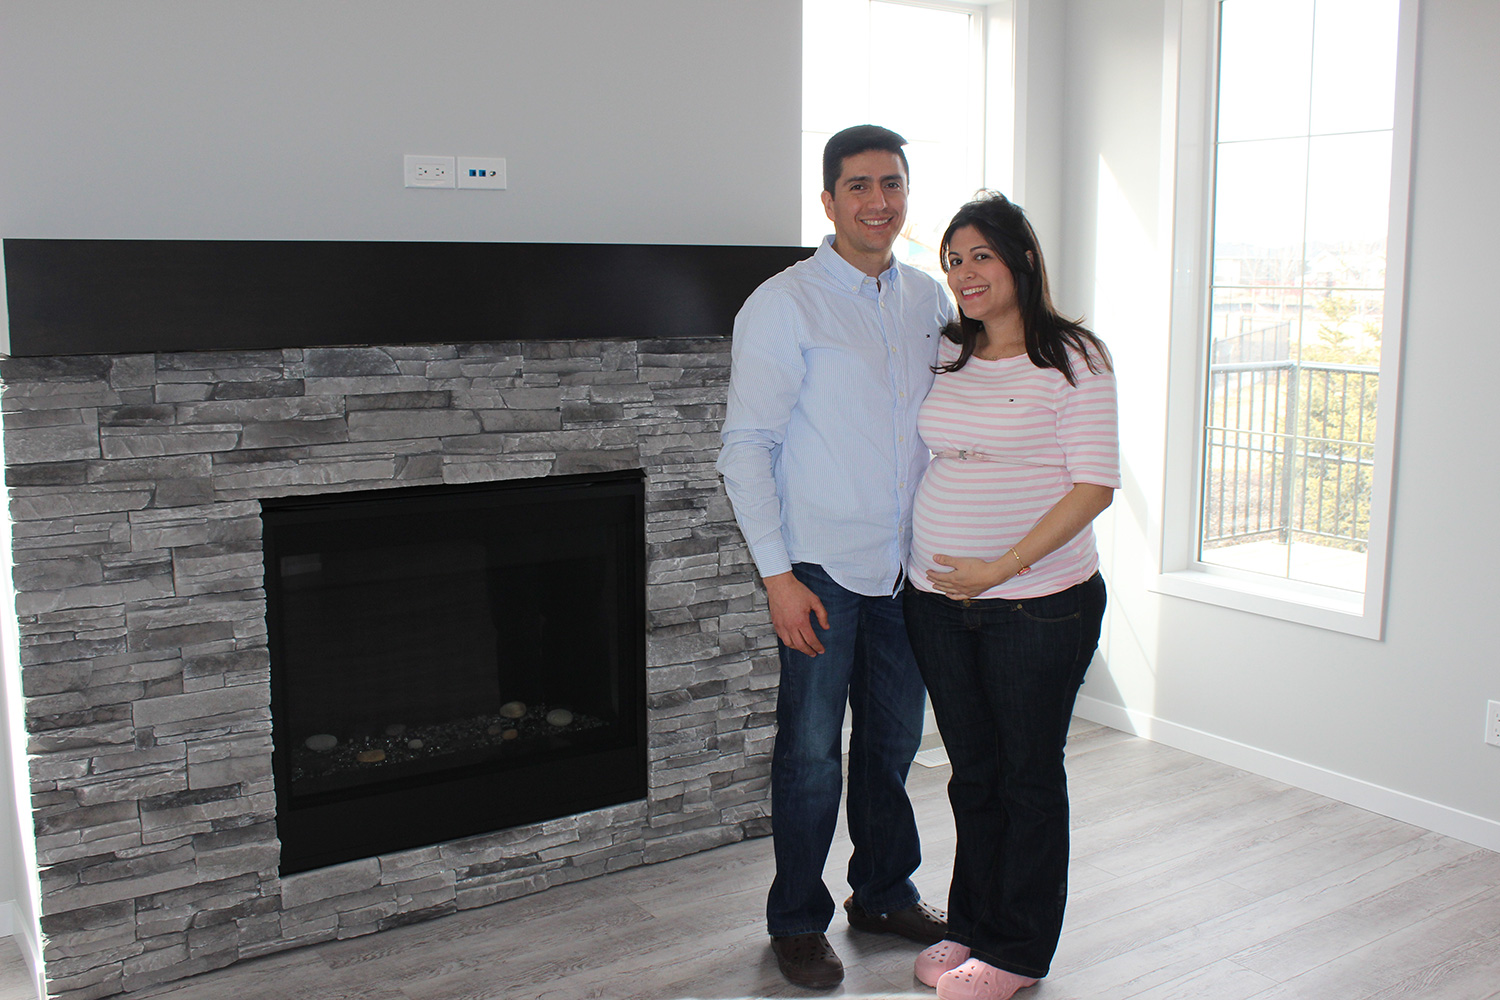 Maria Rocha Gil and Javier Gonzalez, recently purchased a 2,600 square foot house in Silverado. Photo by Andrea Cox / For CREB®Now